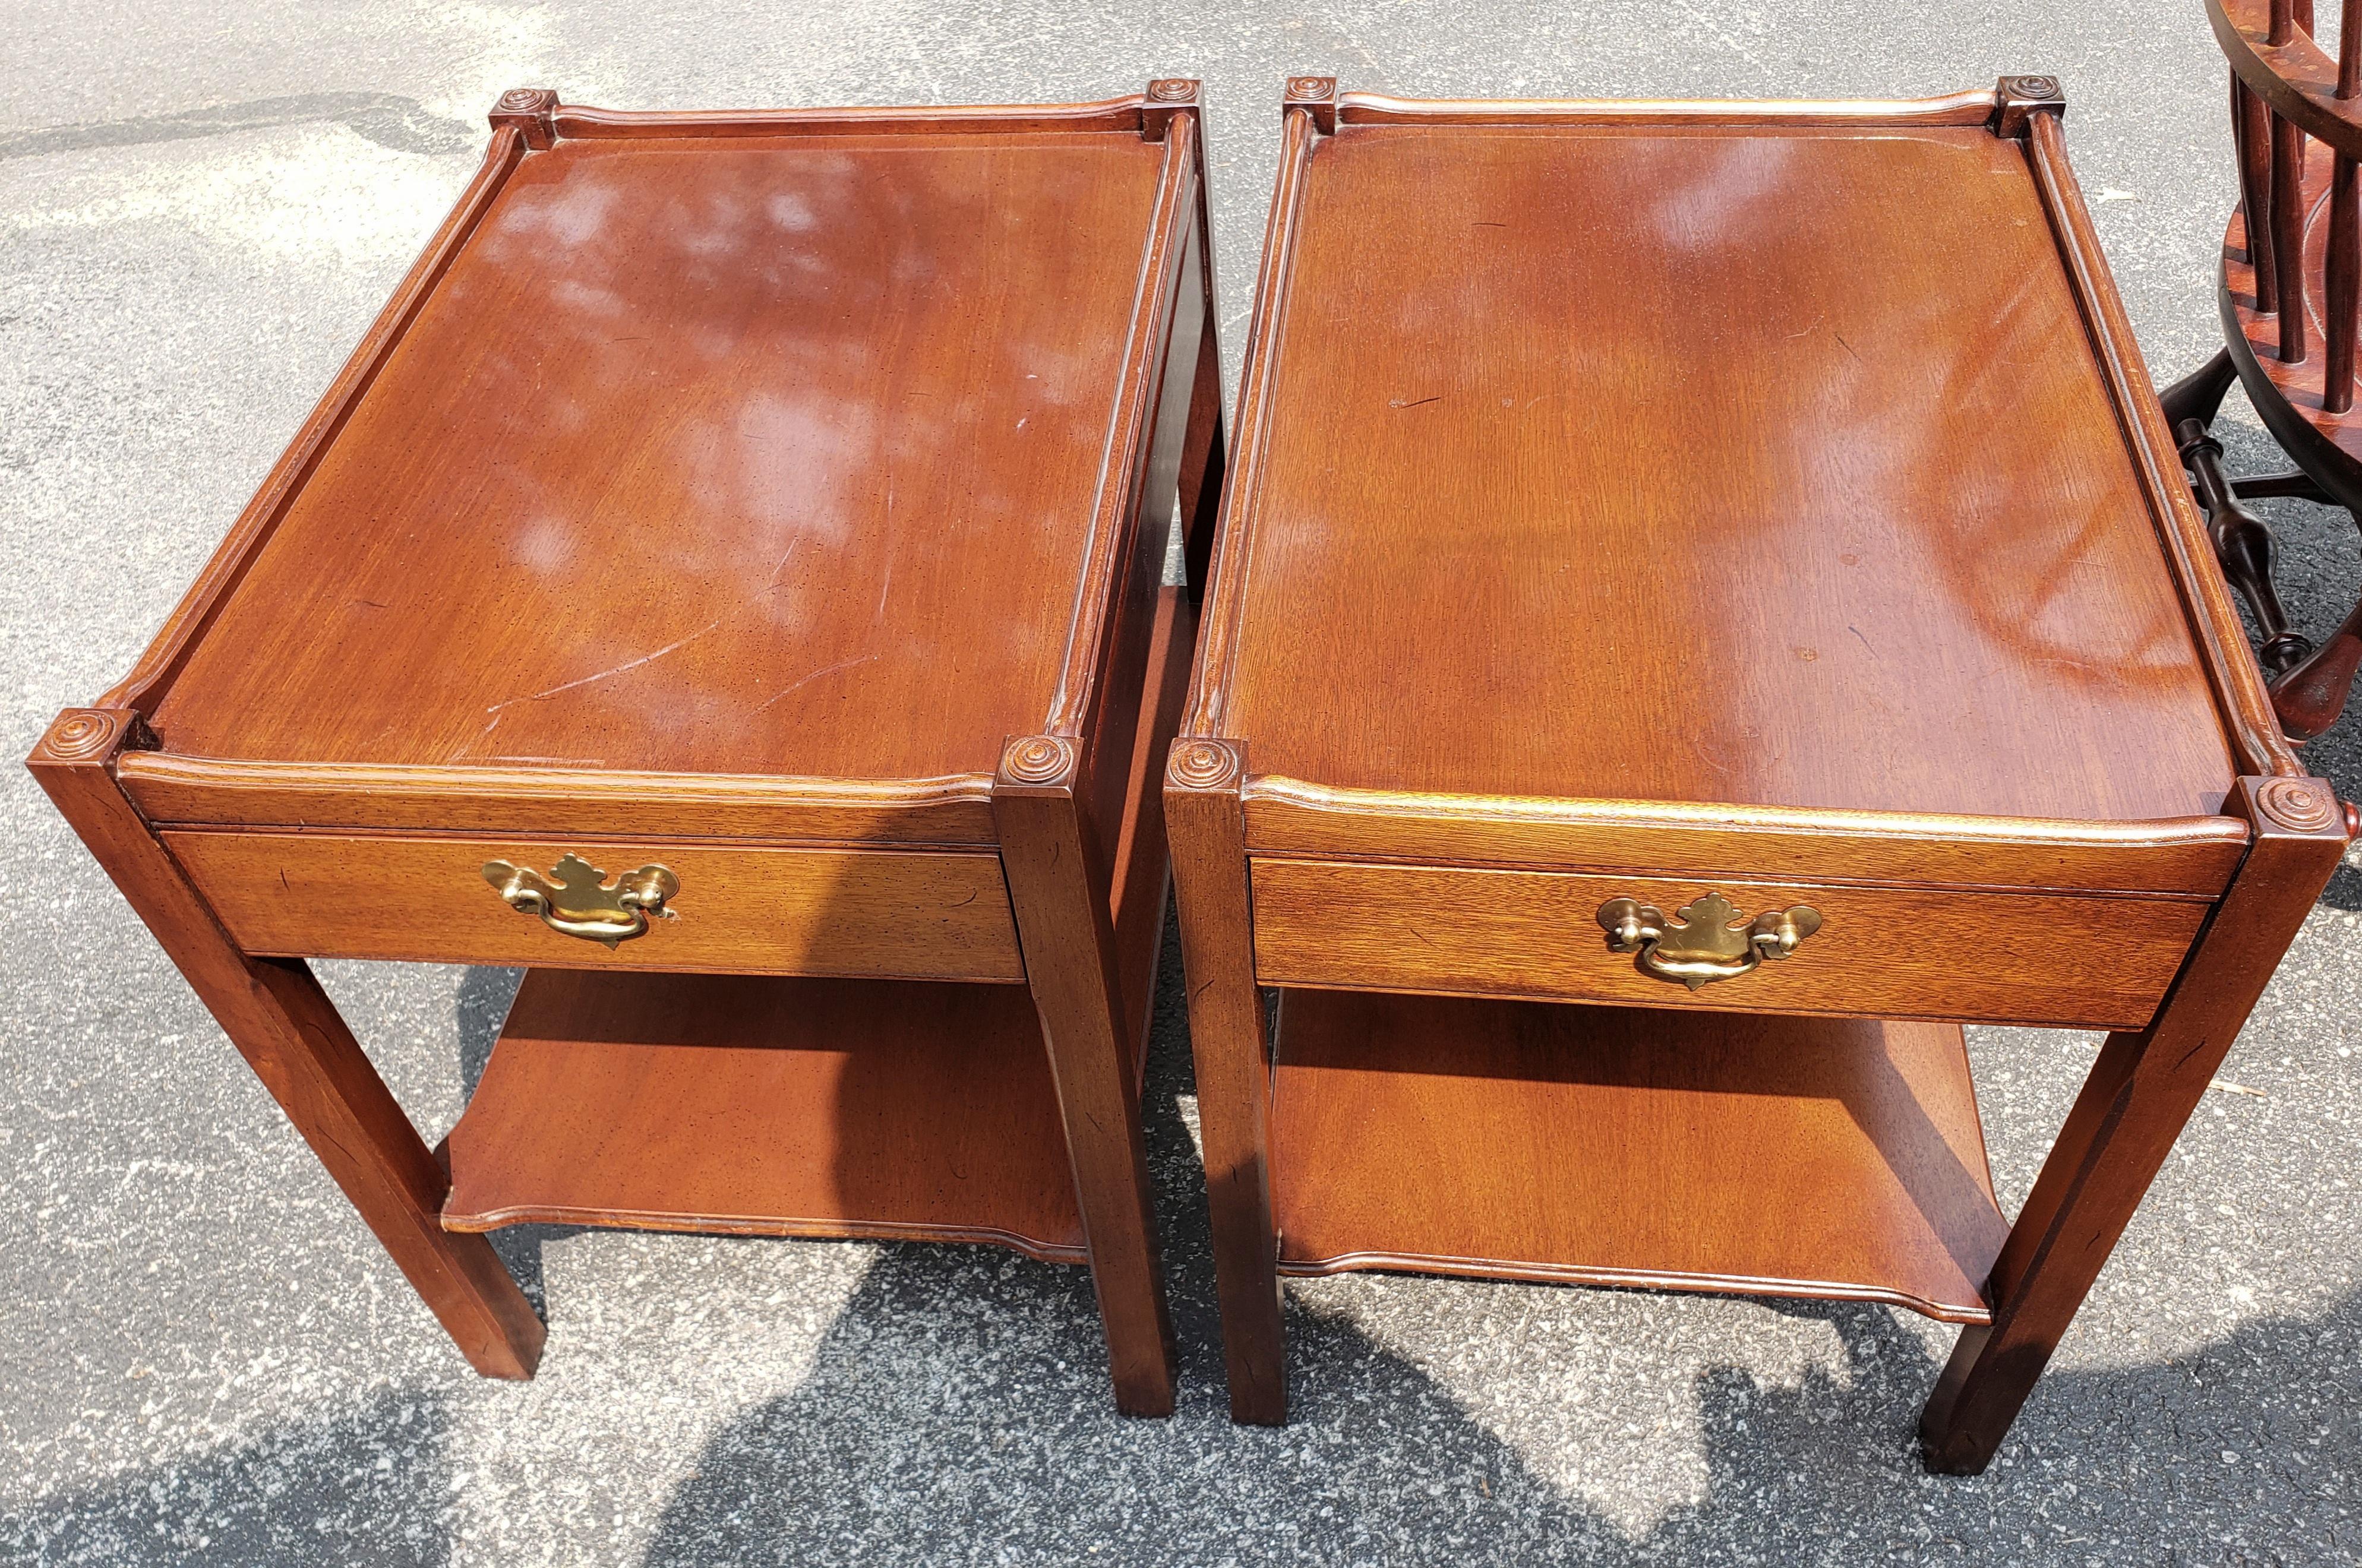 American Hickory Chair Co. James River Collection Solid Mahogany Side Tables, a Pair For Sale